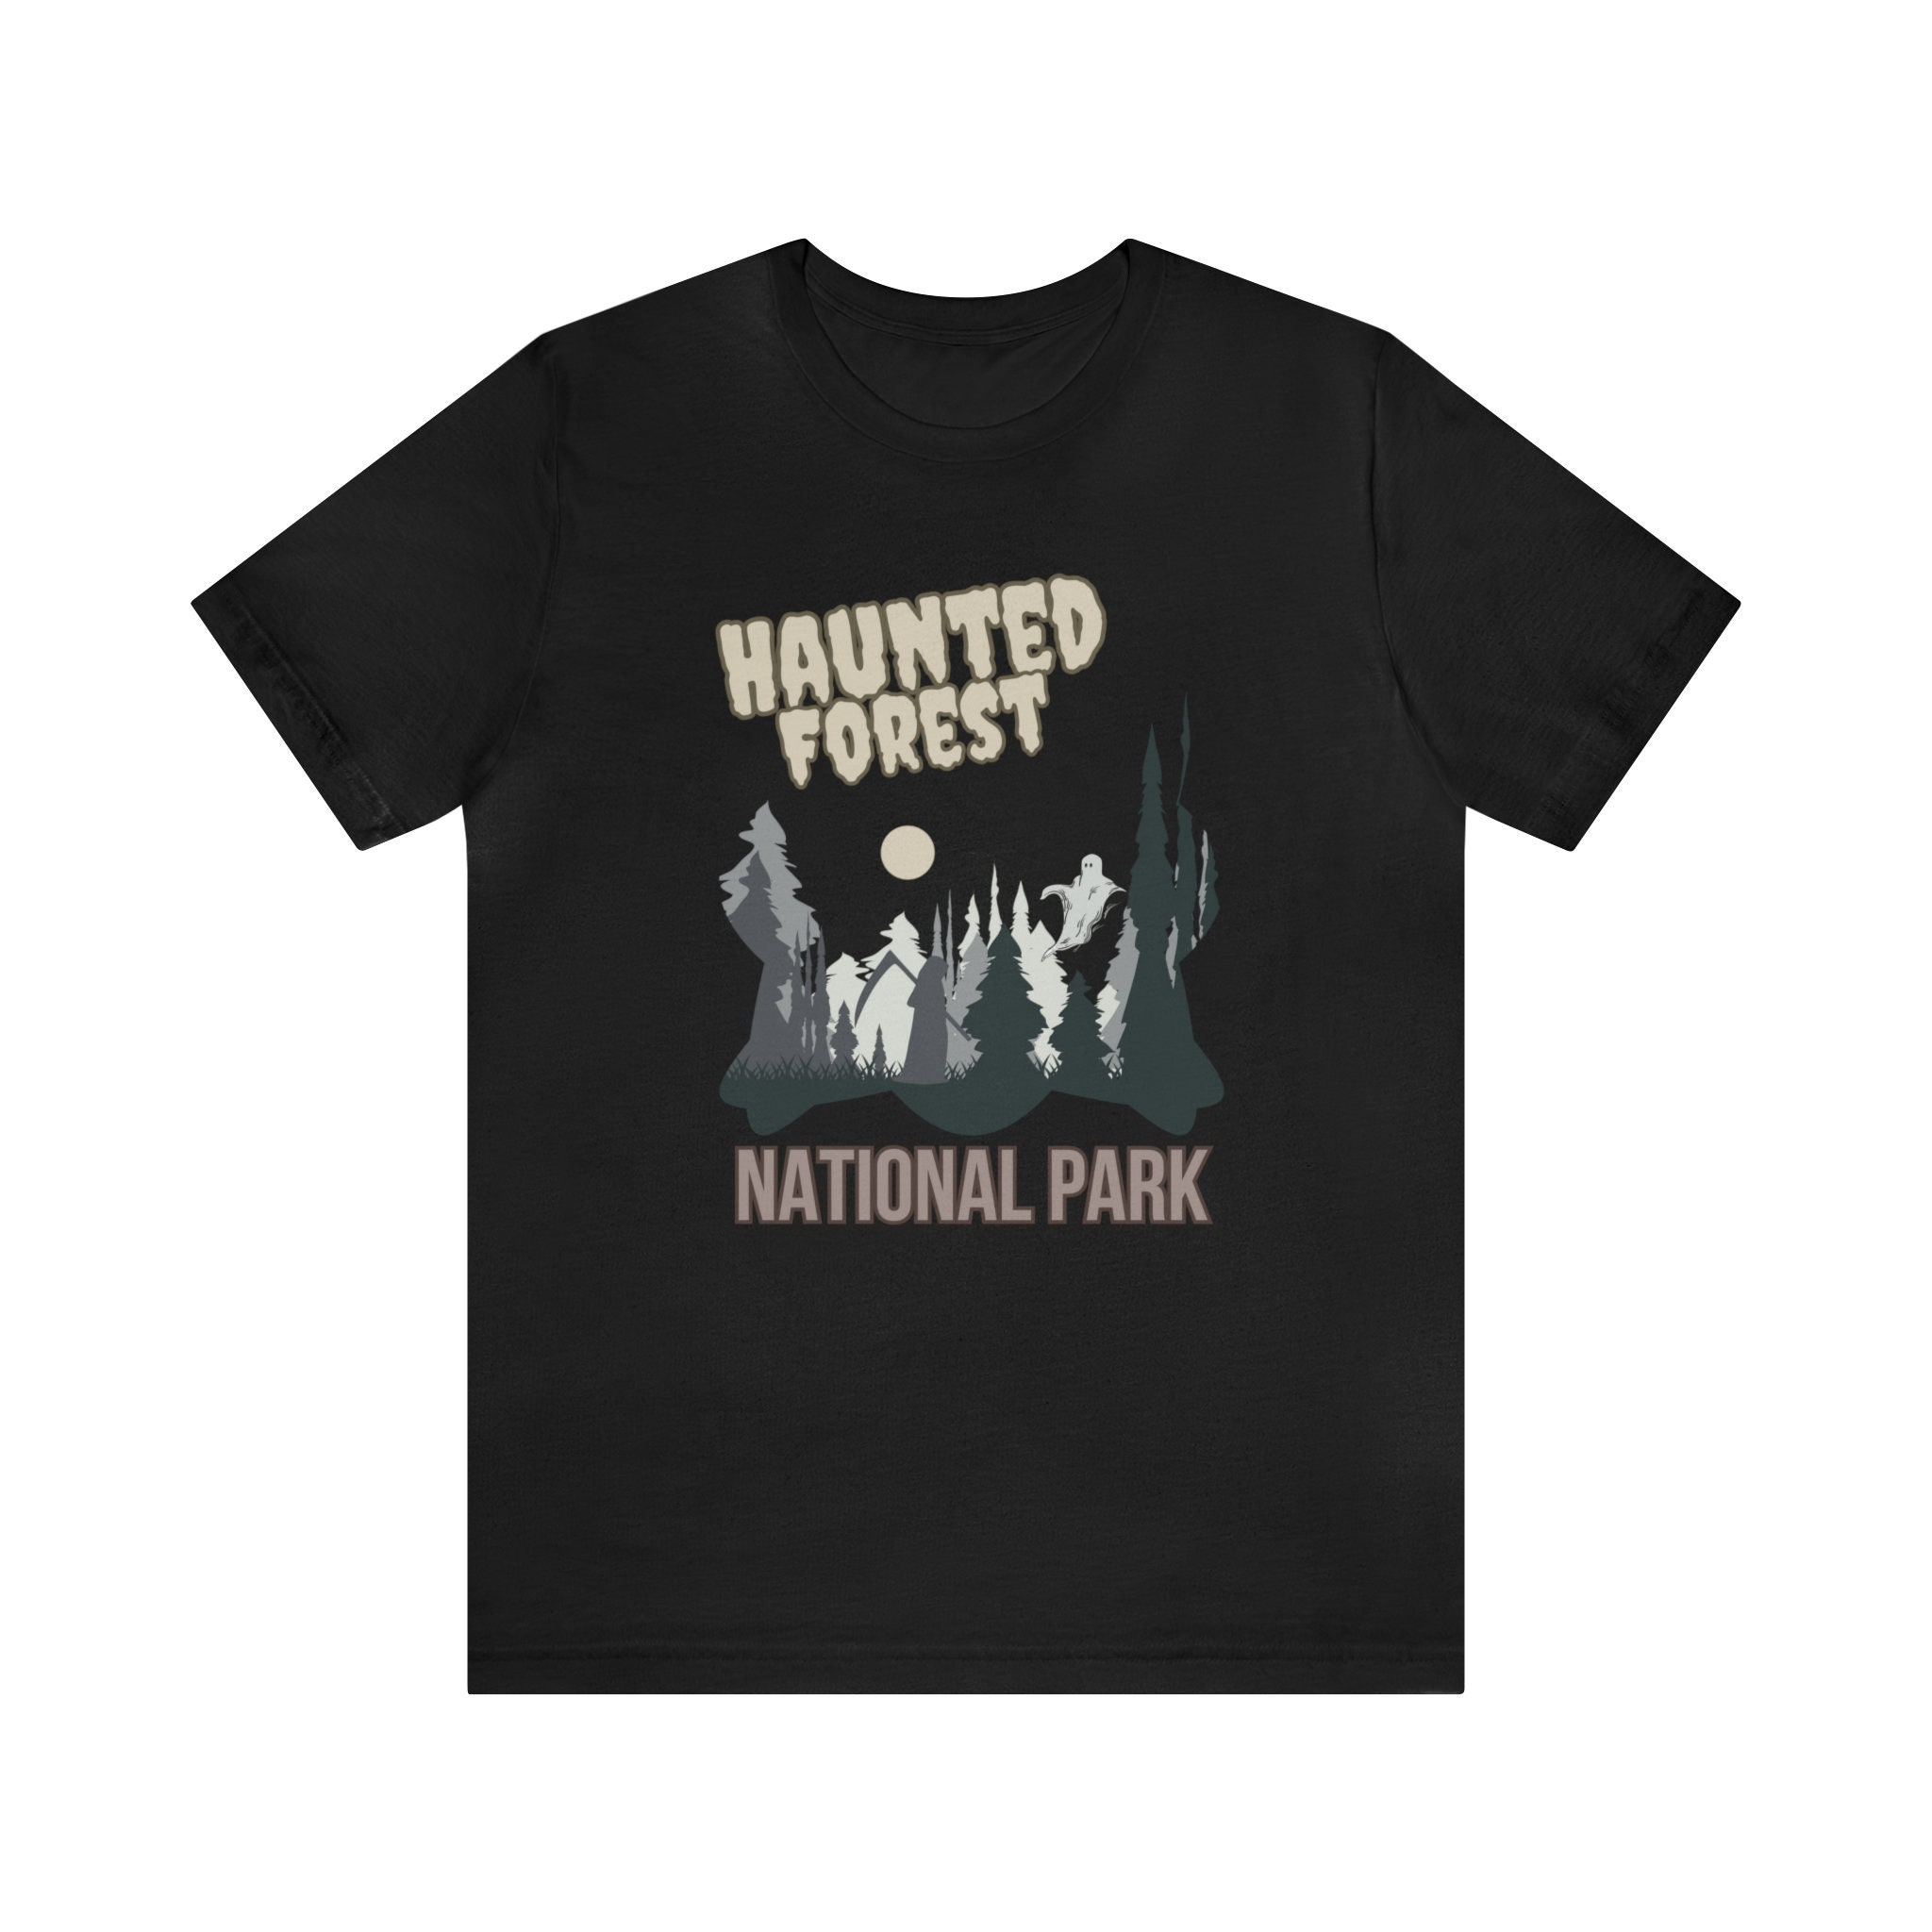 Discover Haunted Forest National Park T-Shirt, Halloween National Park T-shirt, Gift for National Park Lover, Gift for Hiker and Camper